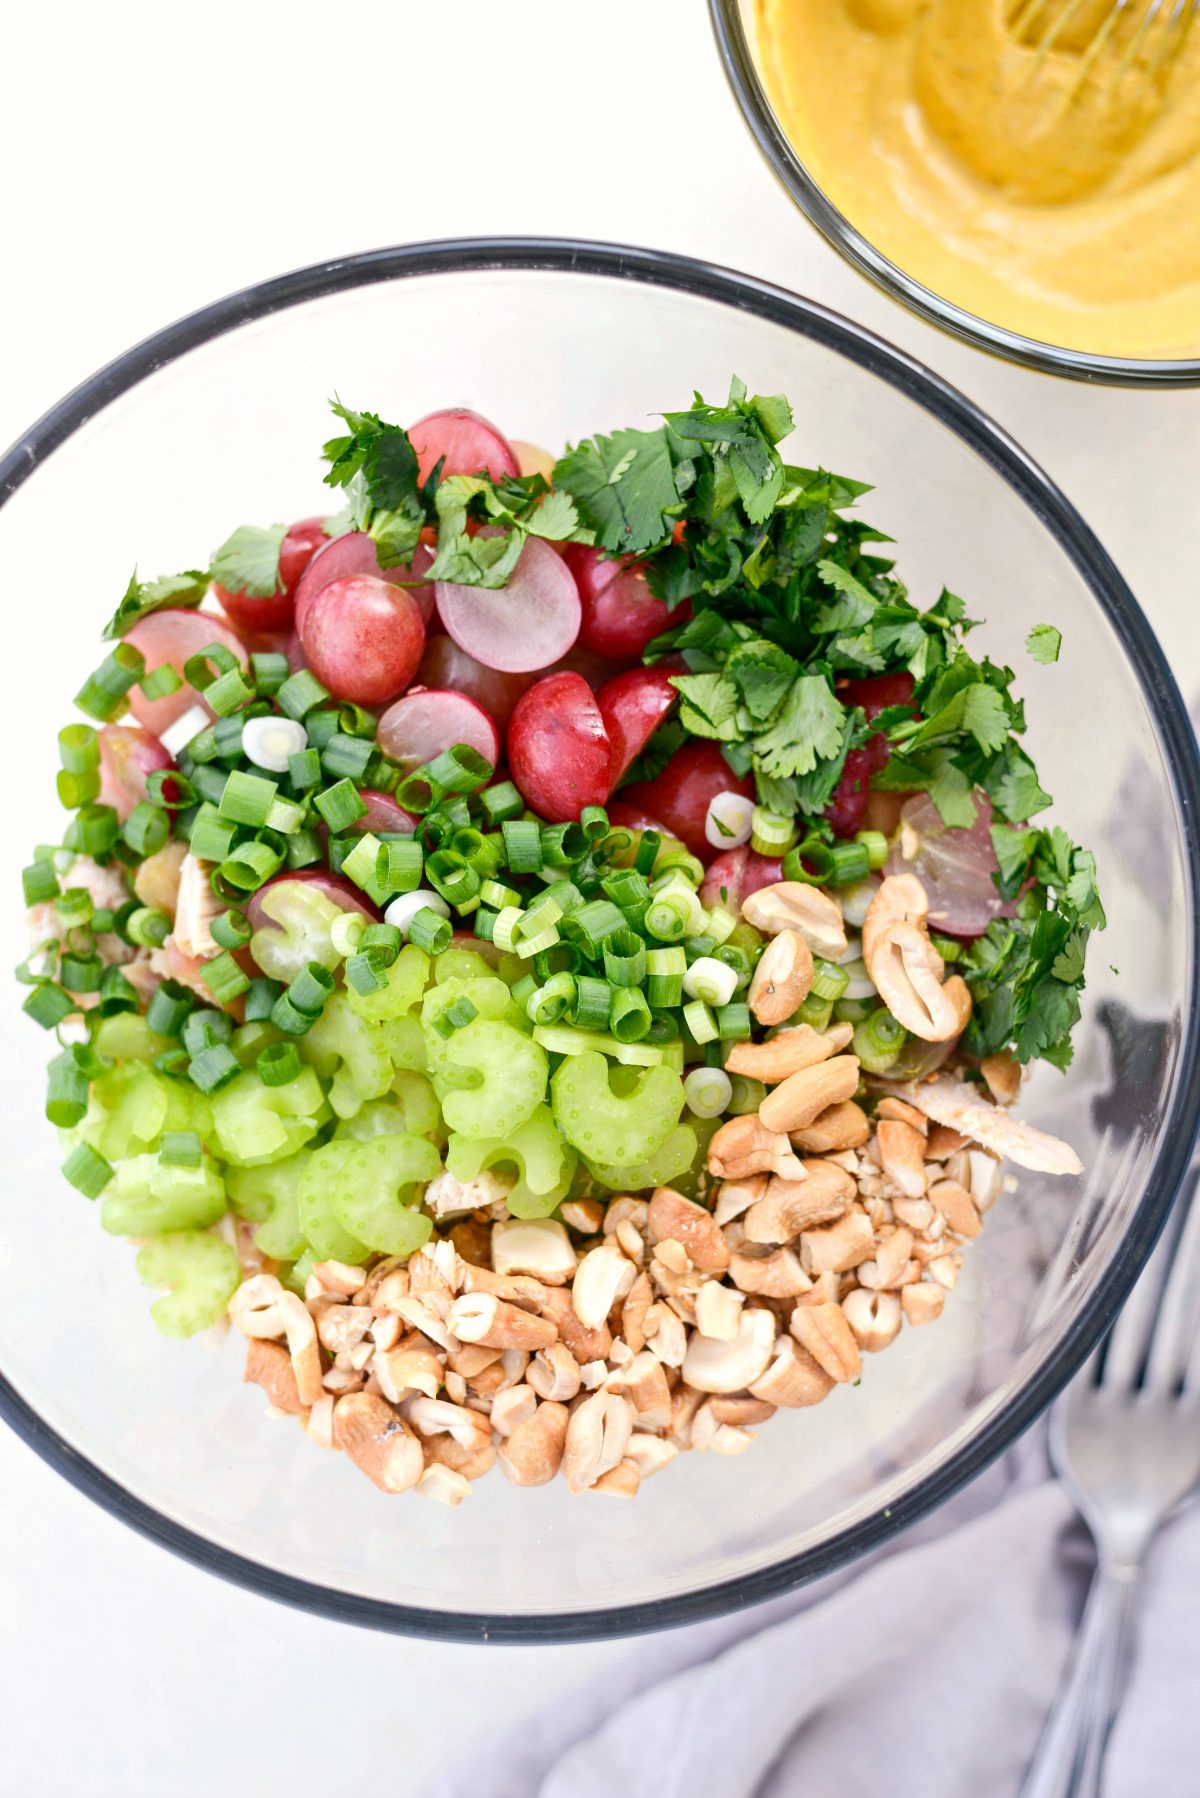 Add chicken, grapes, celery, green onion, cilantro and cashews to a bowl